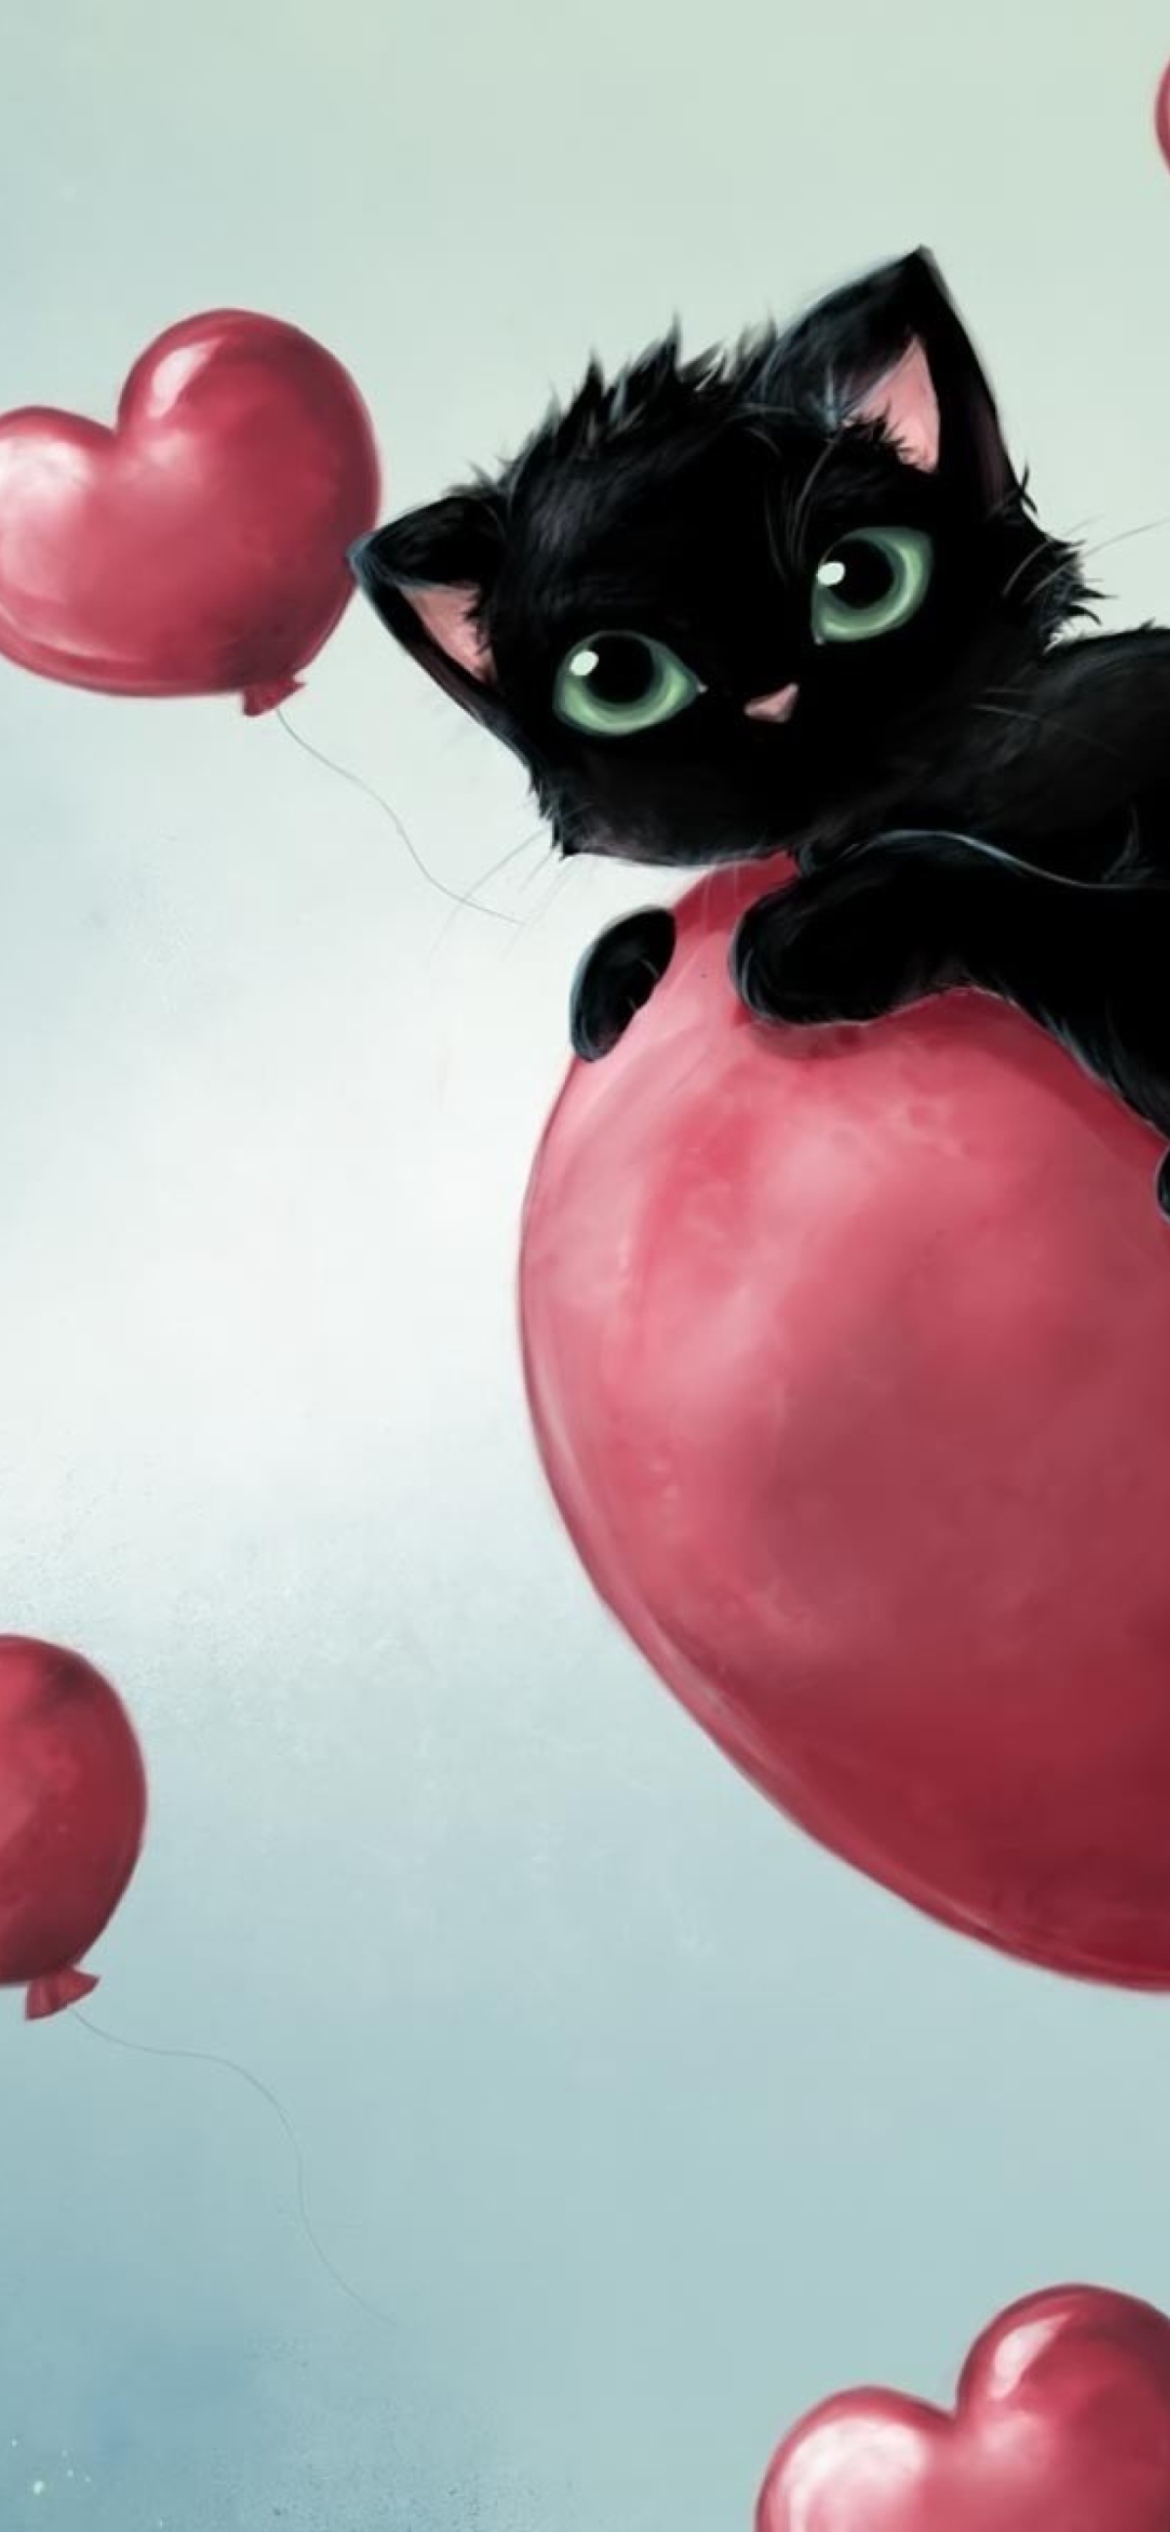 Black Kitty And Red Heart Balloons wallpaper 1170x2532